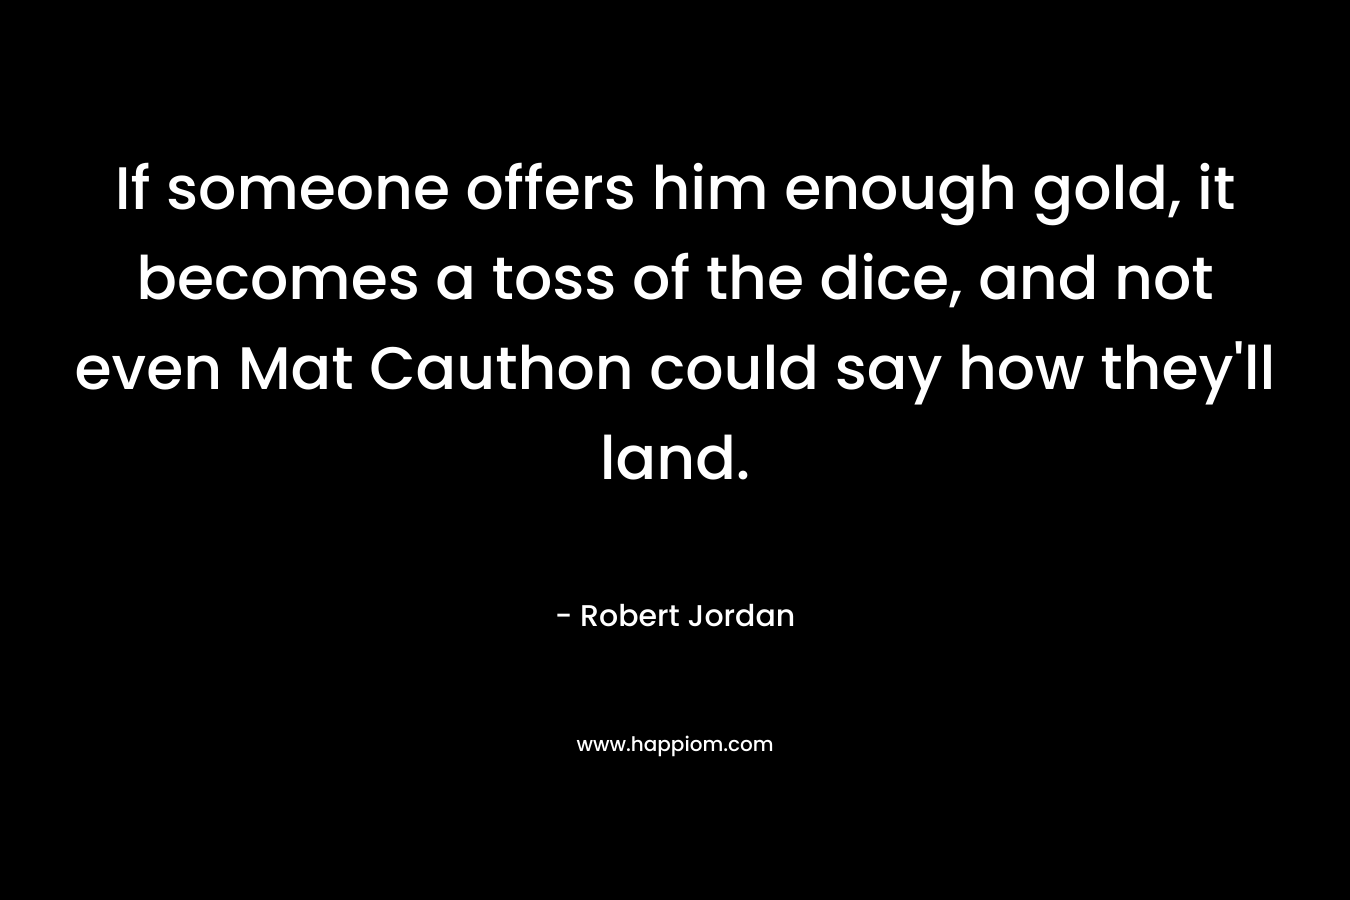 If someone offers him enough gold, it becomes a toss of the dice, and not even Mat Cauthon could say how they’ll land. – Robert Jordan